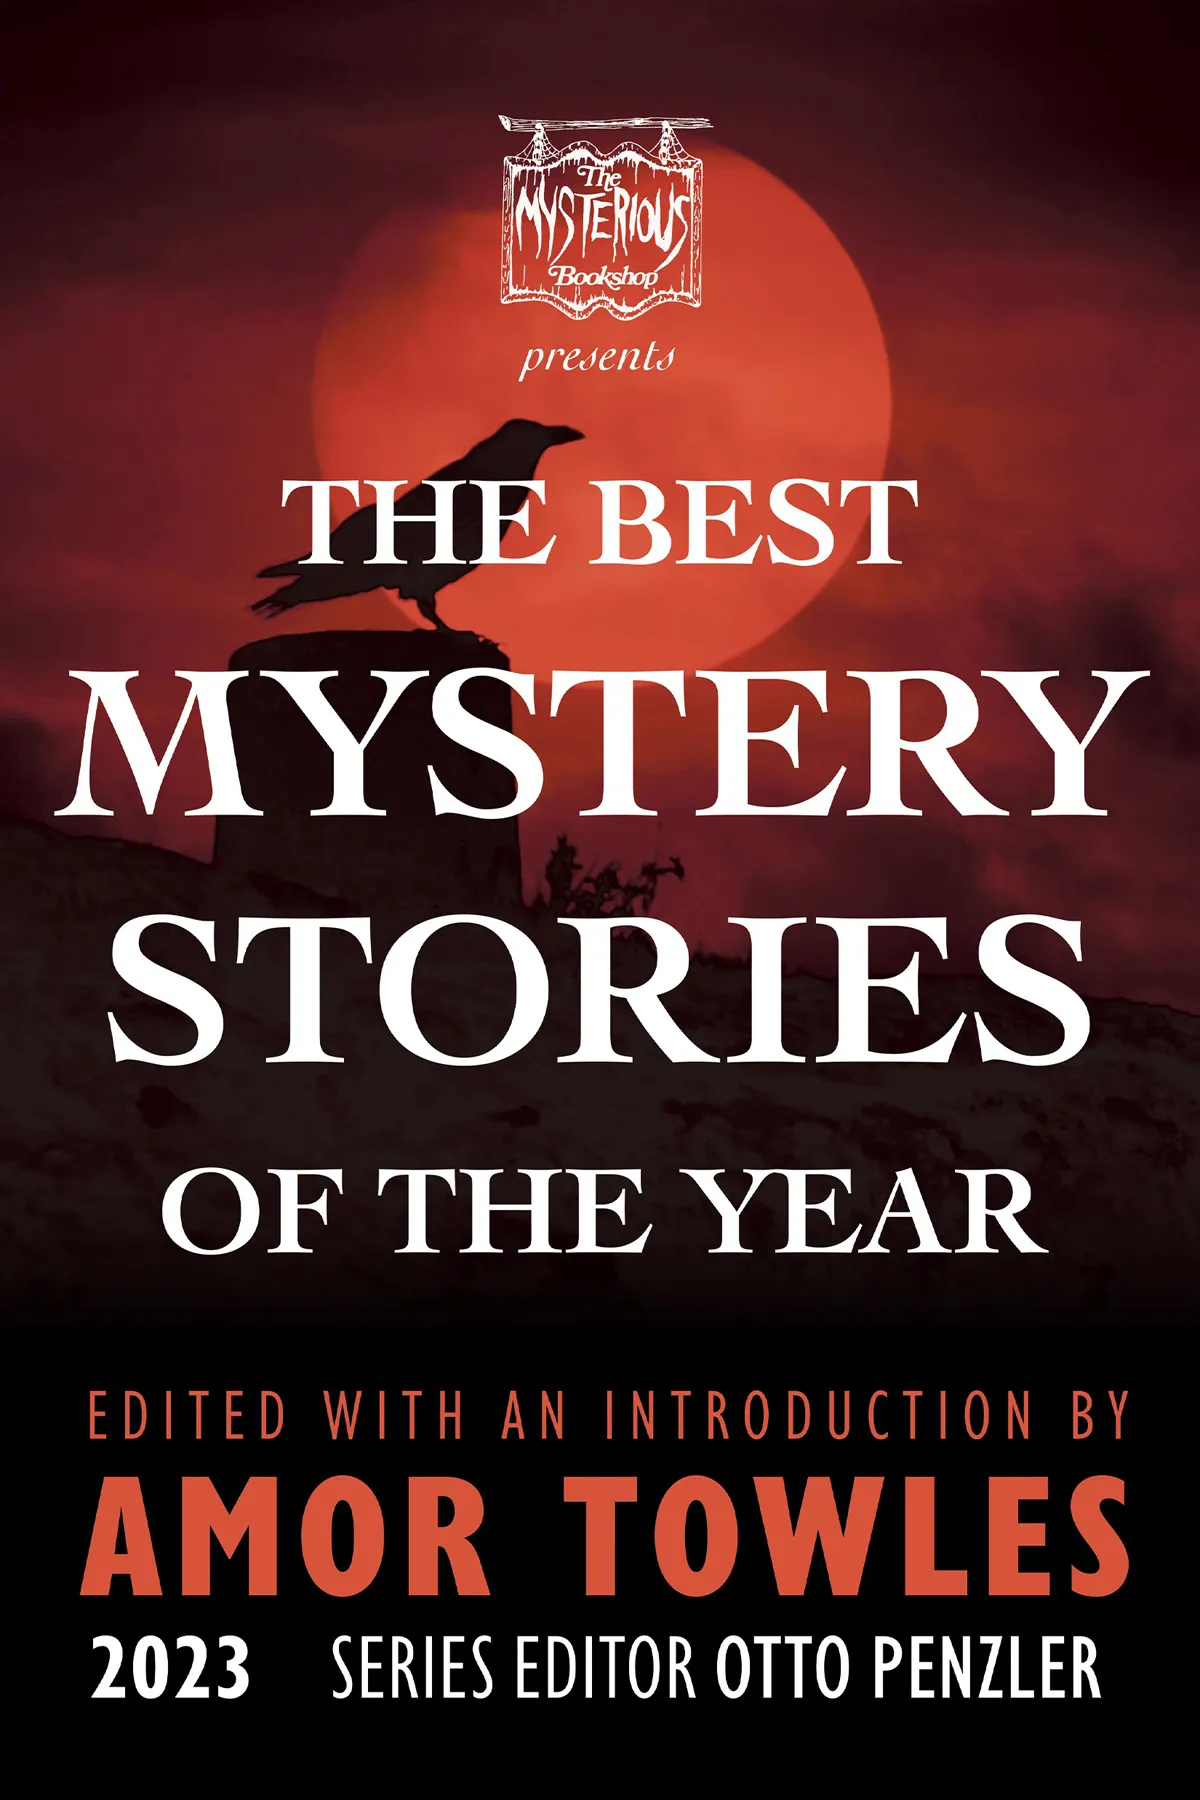 The Mysterious Bookshop Presents the Best Mystery Stories of the Year 2023